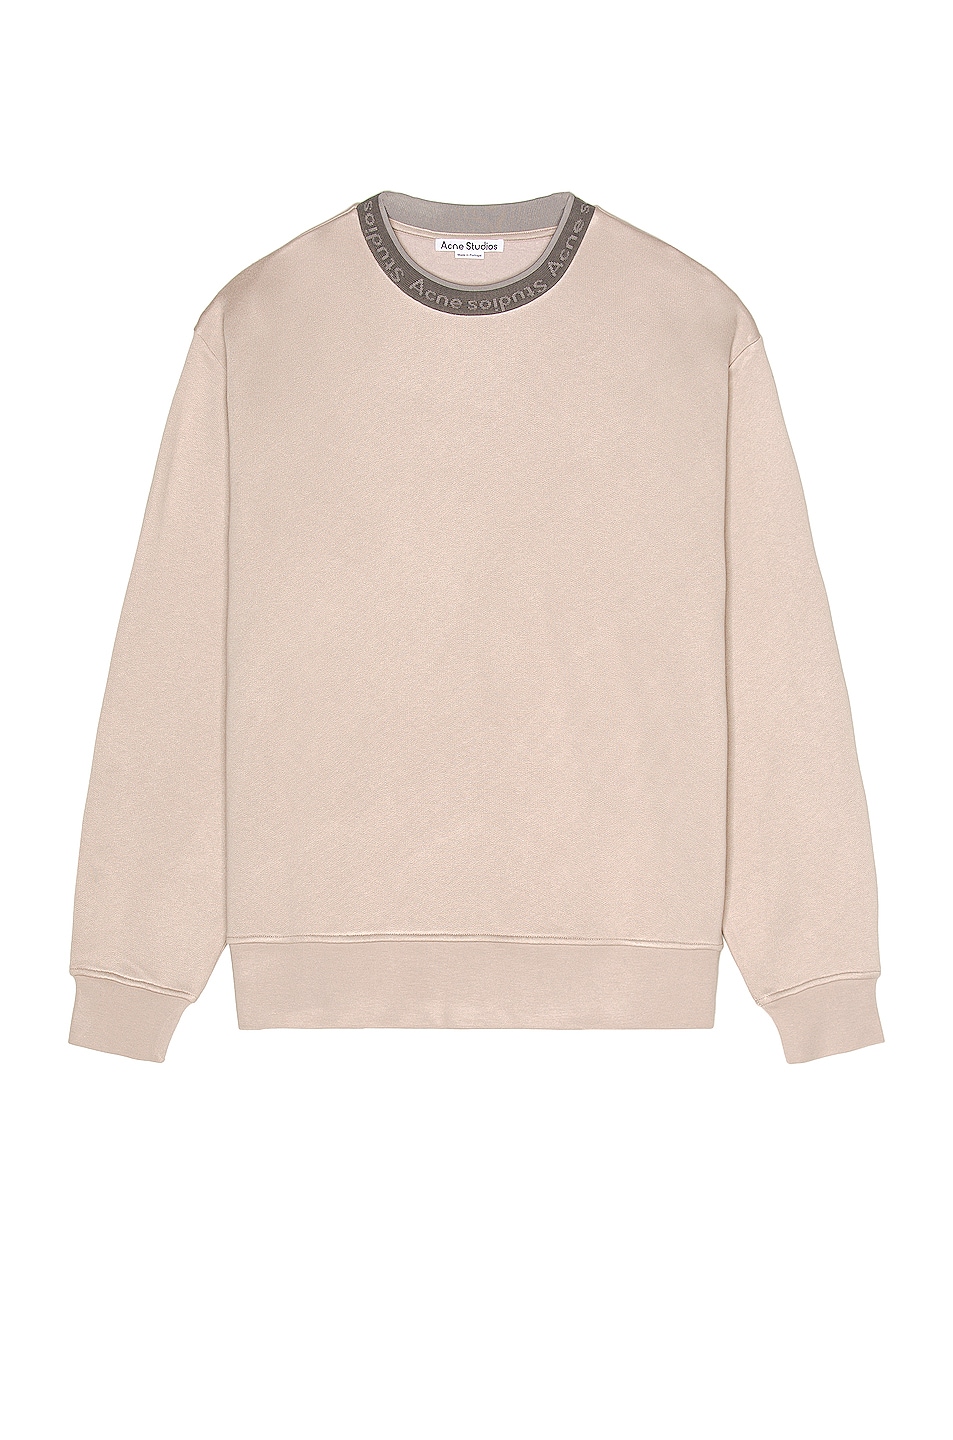 Image 1 of Acne Studios Crewneck Sweater in Oyster Grey